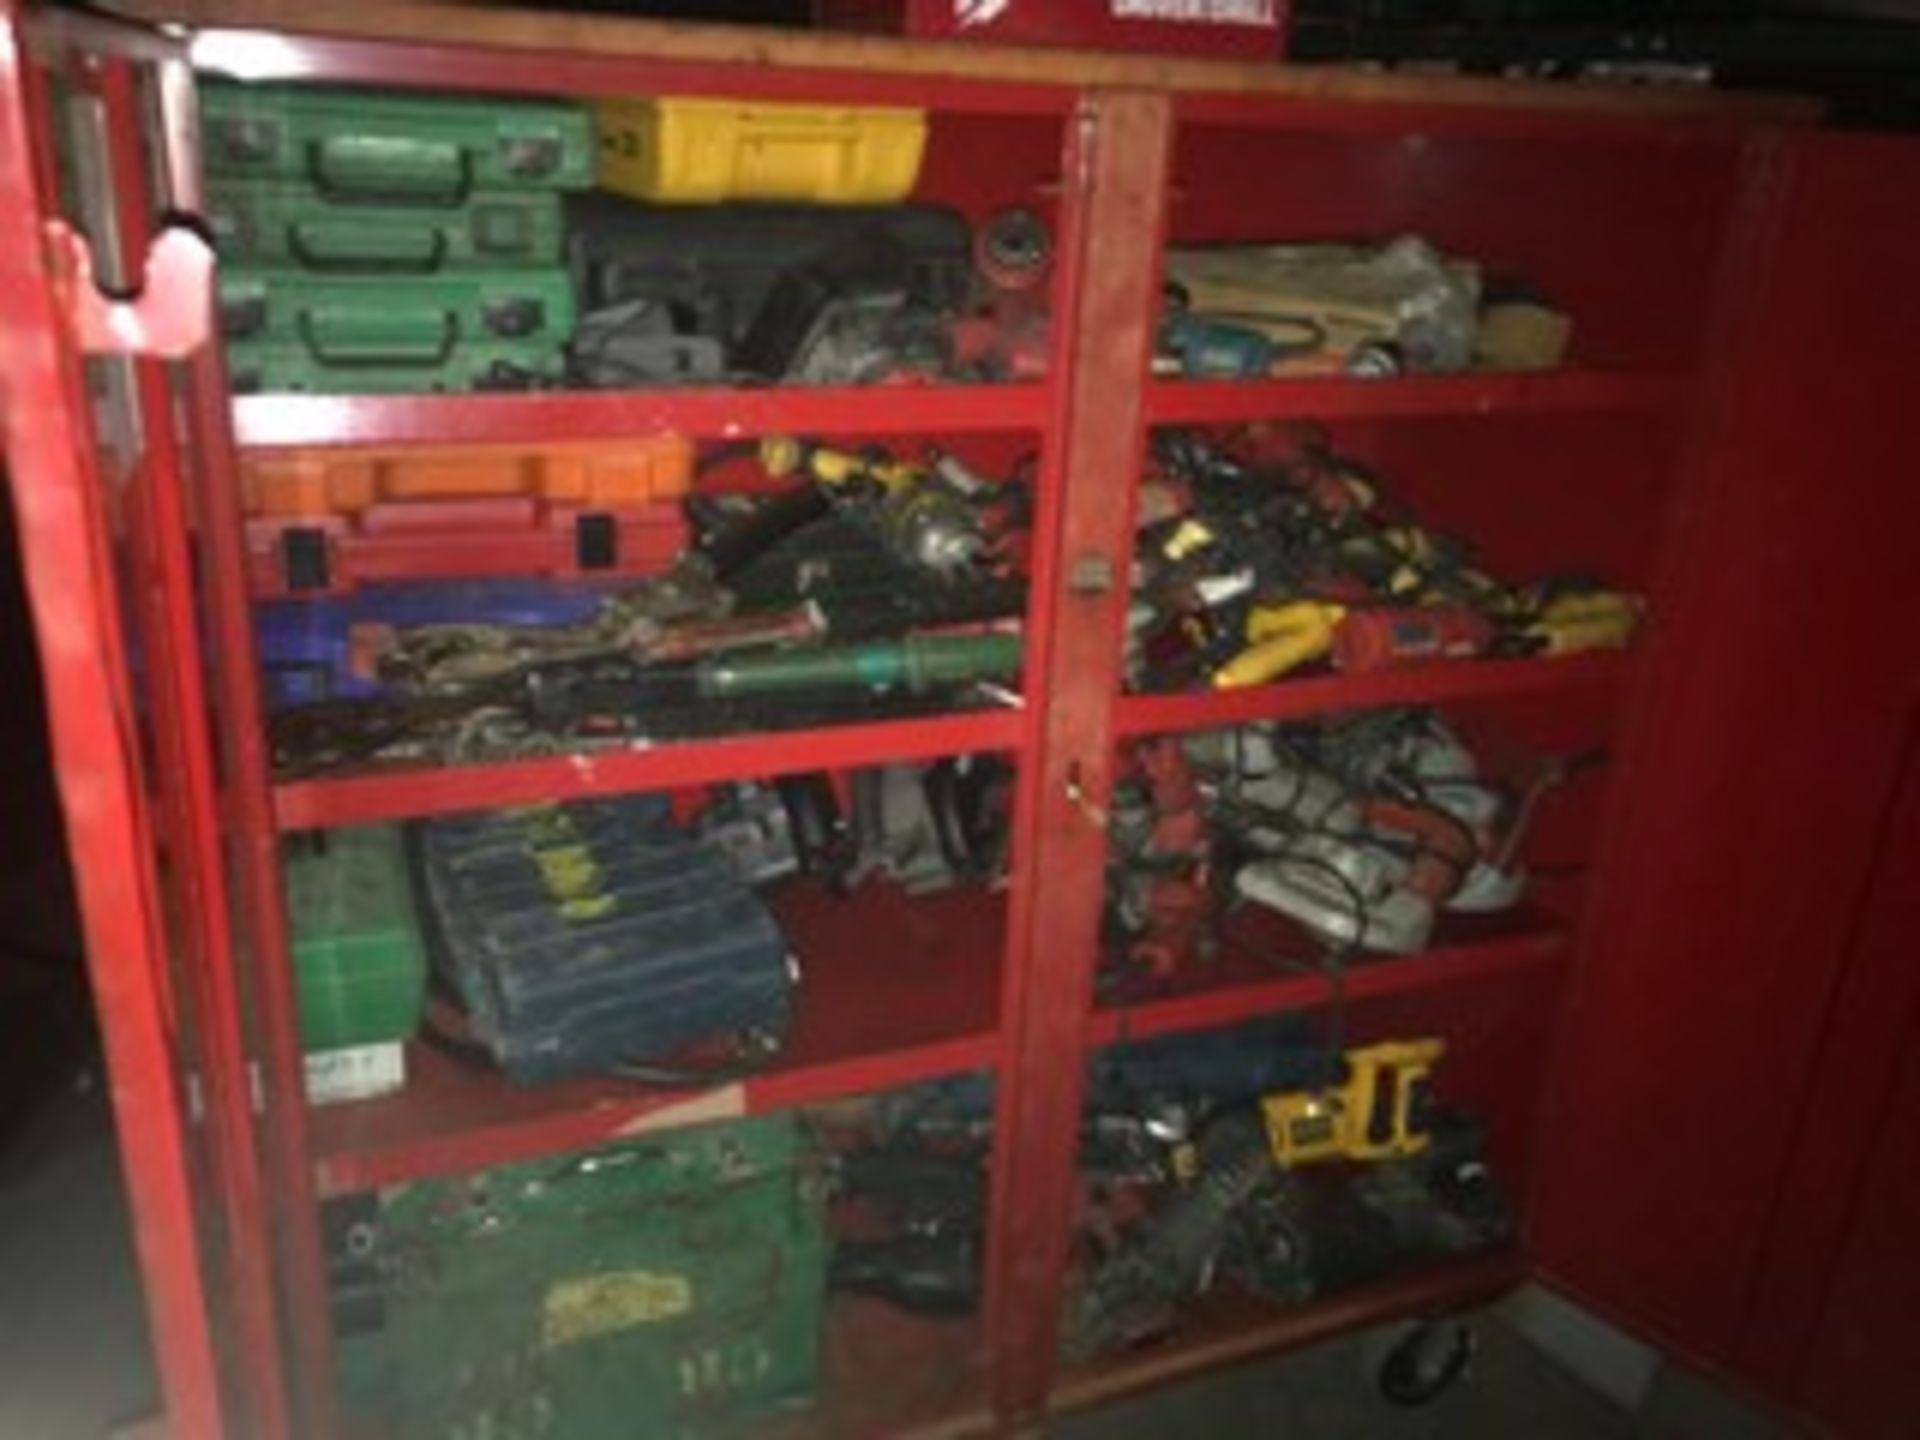 2-DOOR GB JOB BOX WITH CONTENTS -RATCHETING KNOCKOUT SETS, HILTI & RAMSET POWDER FASTENING GUNS - Image 2 of 6